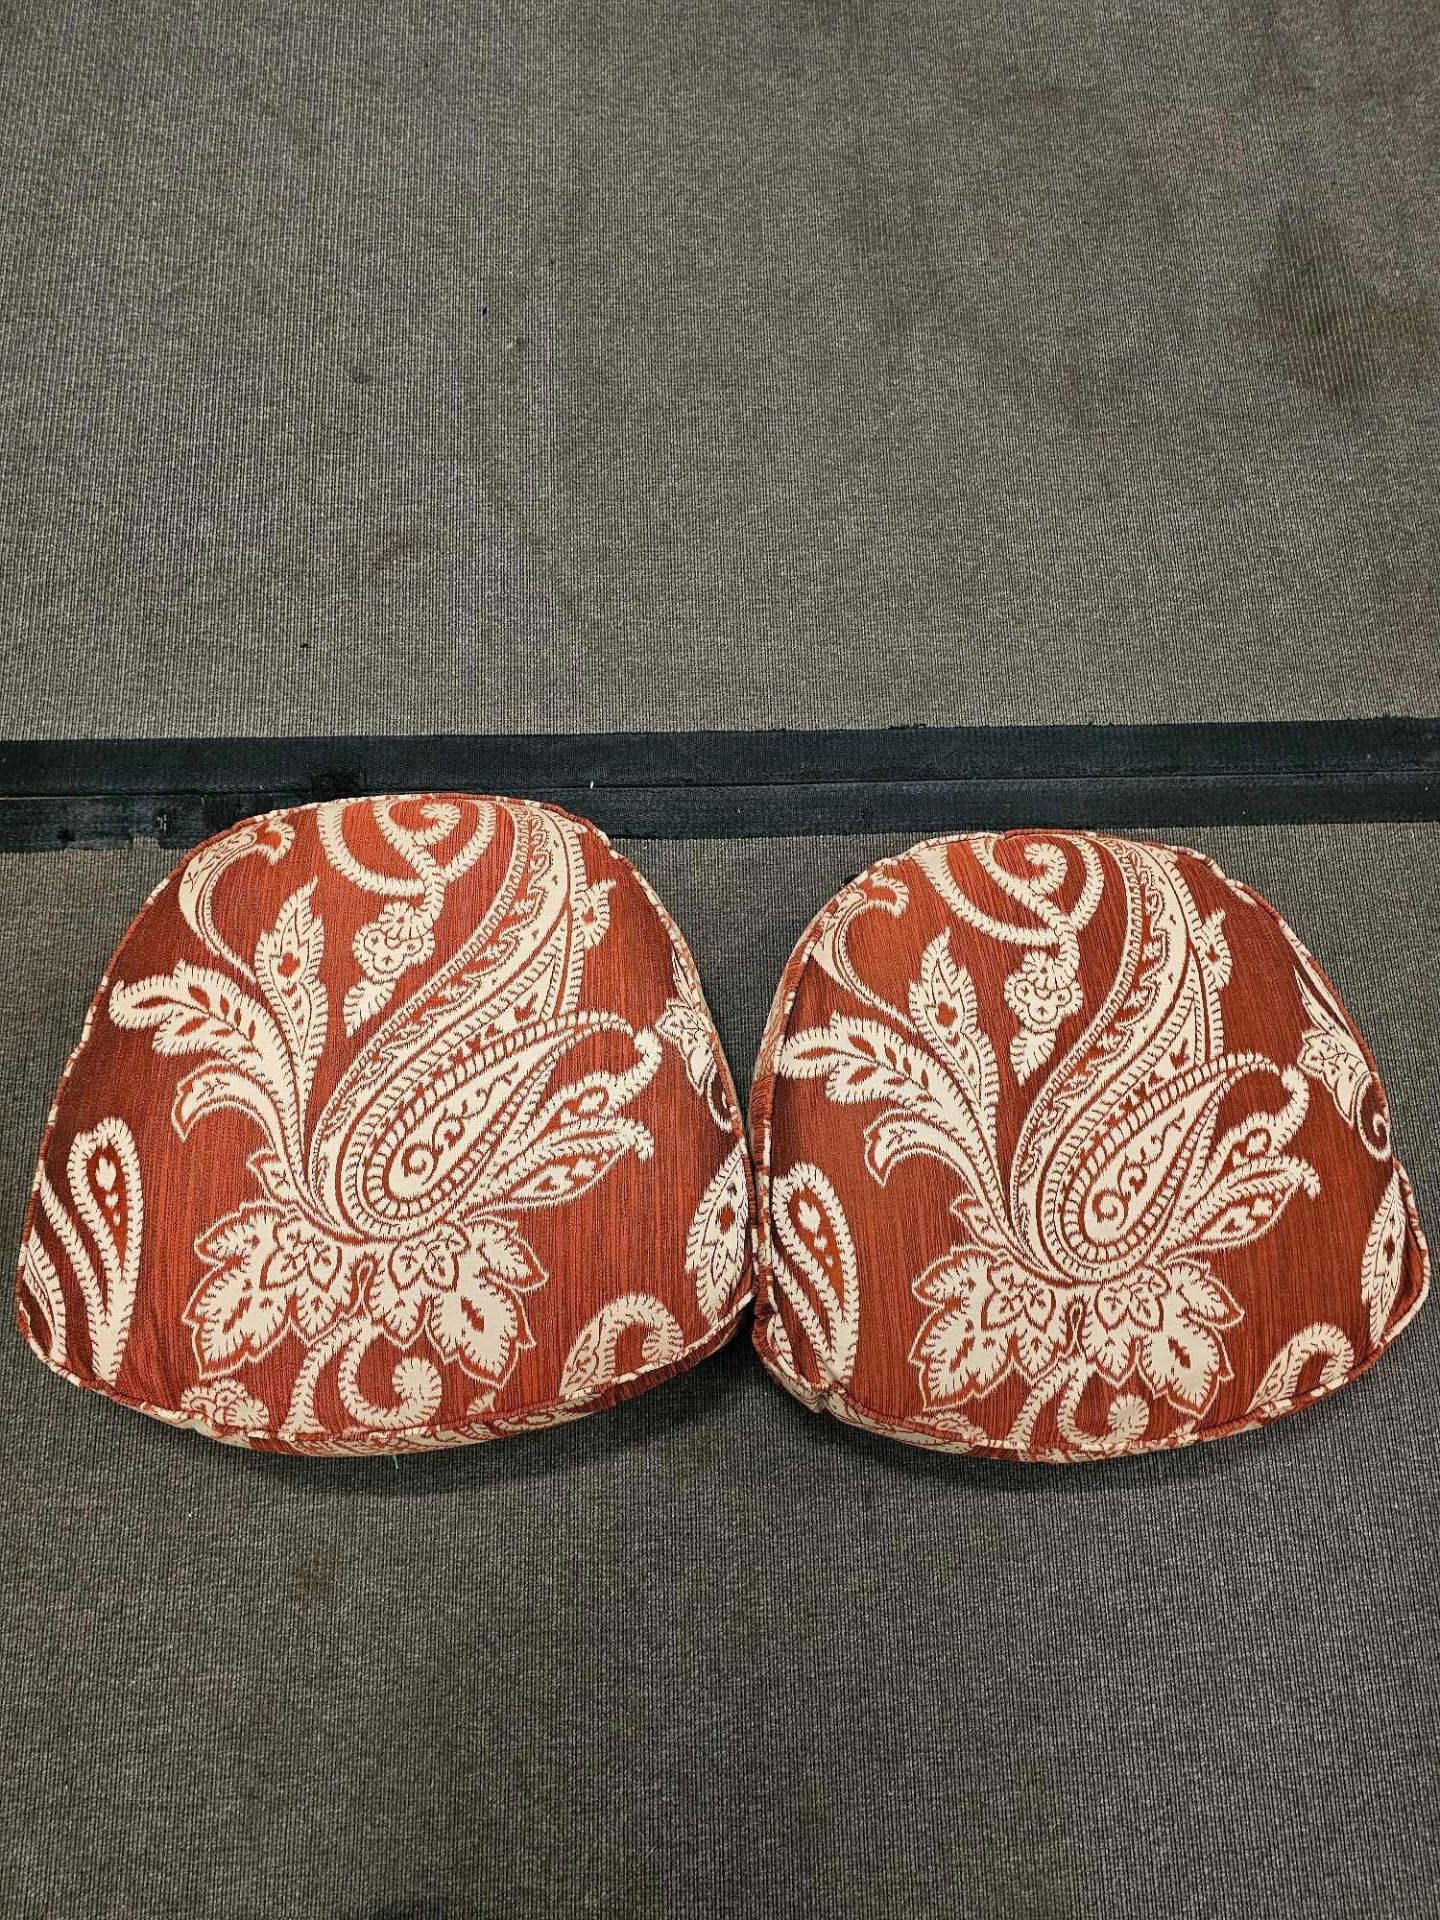 2 x Red/White Patterned Cushions Size 59 x 51cm (Ref Cush 147)